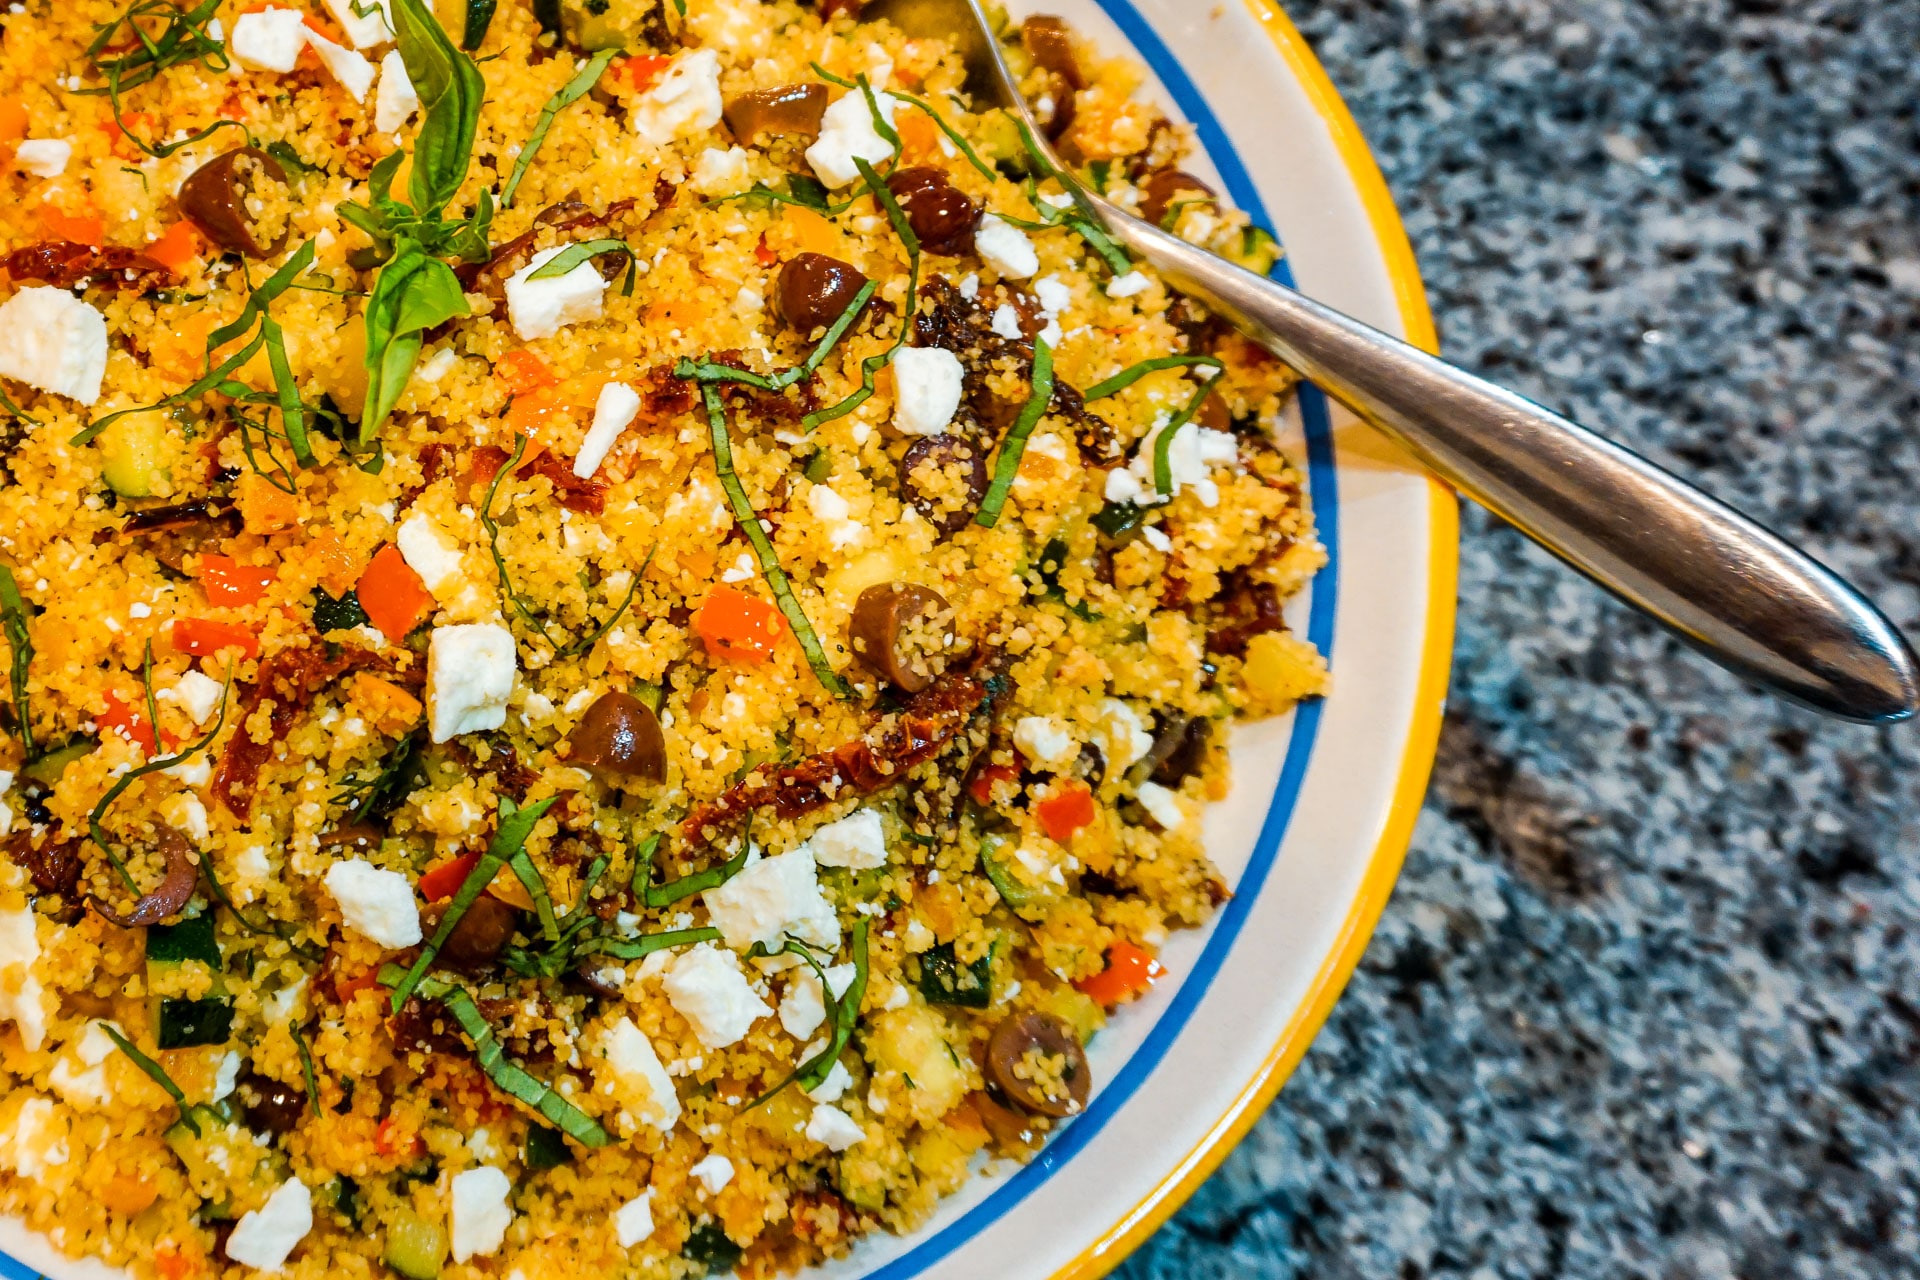 Mediterranean Couscous Salad with Vegetables – A Healthy Vegetarian Recipe